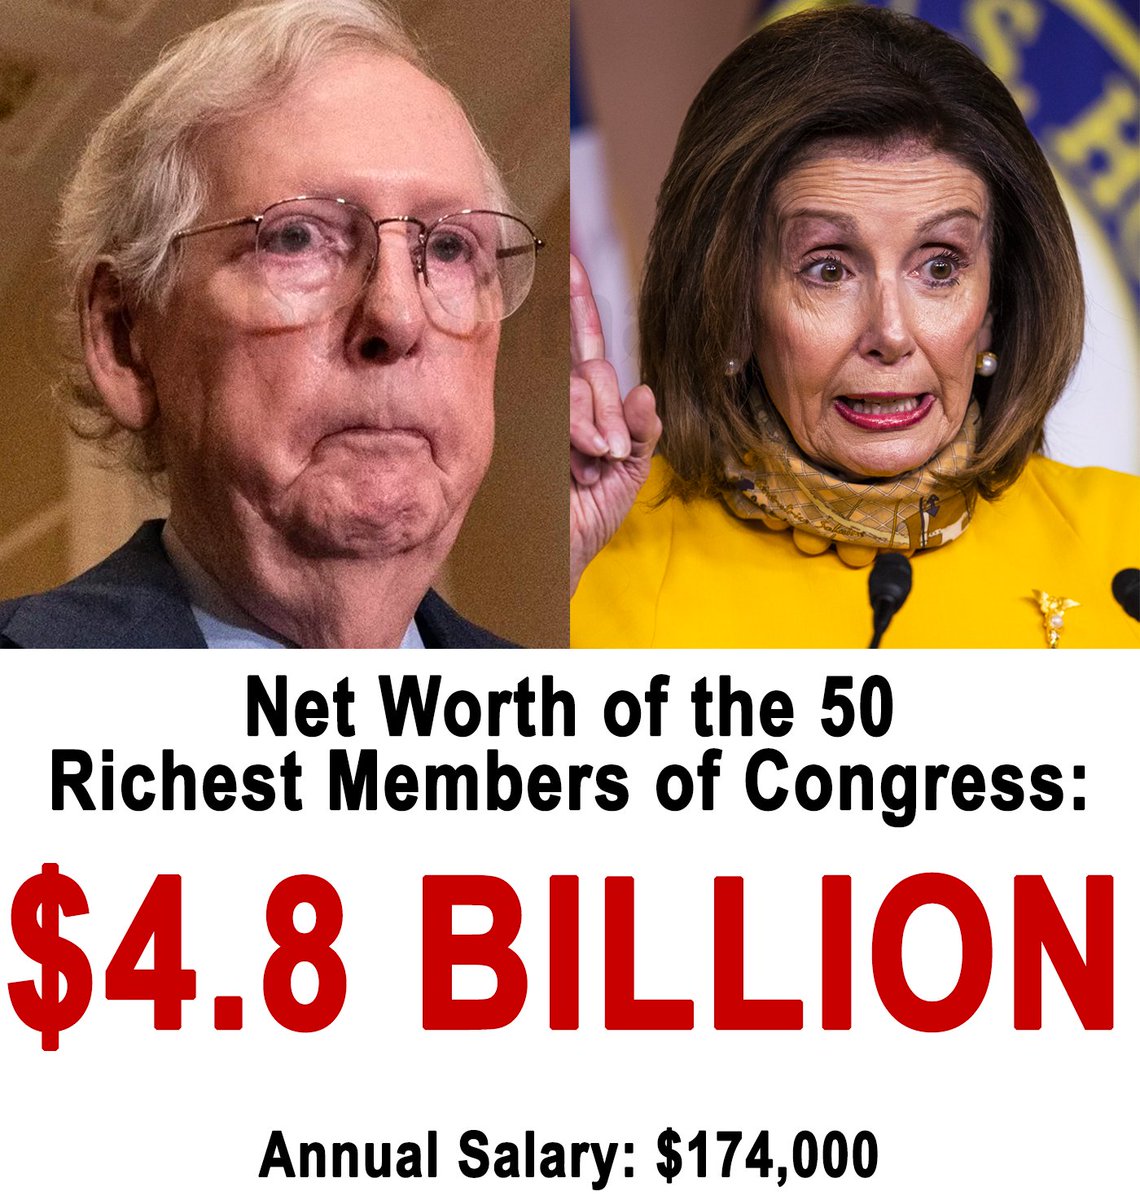 The combined net worth of the 50 richest members of Congress is $4.8 Billion. With an annual salary of $174k, they would have to work 27,500 years to earn that much money. The highest positions of our government, on both sides of the aisle, are abusing their power for personal…